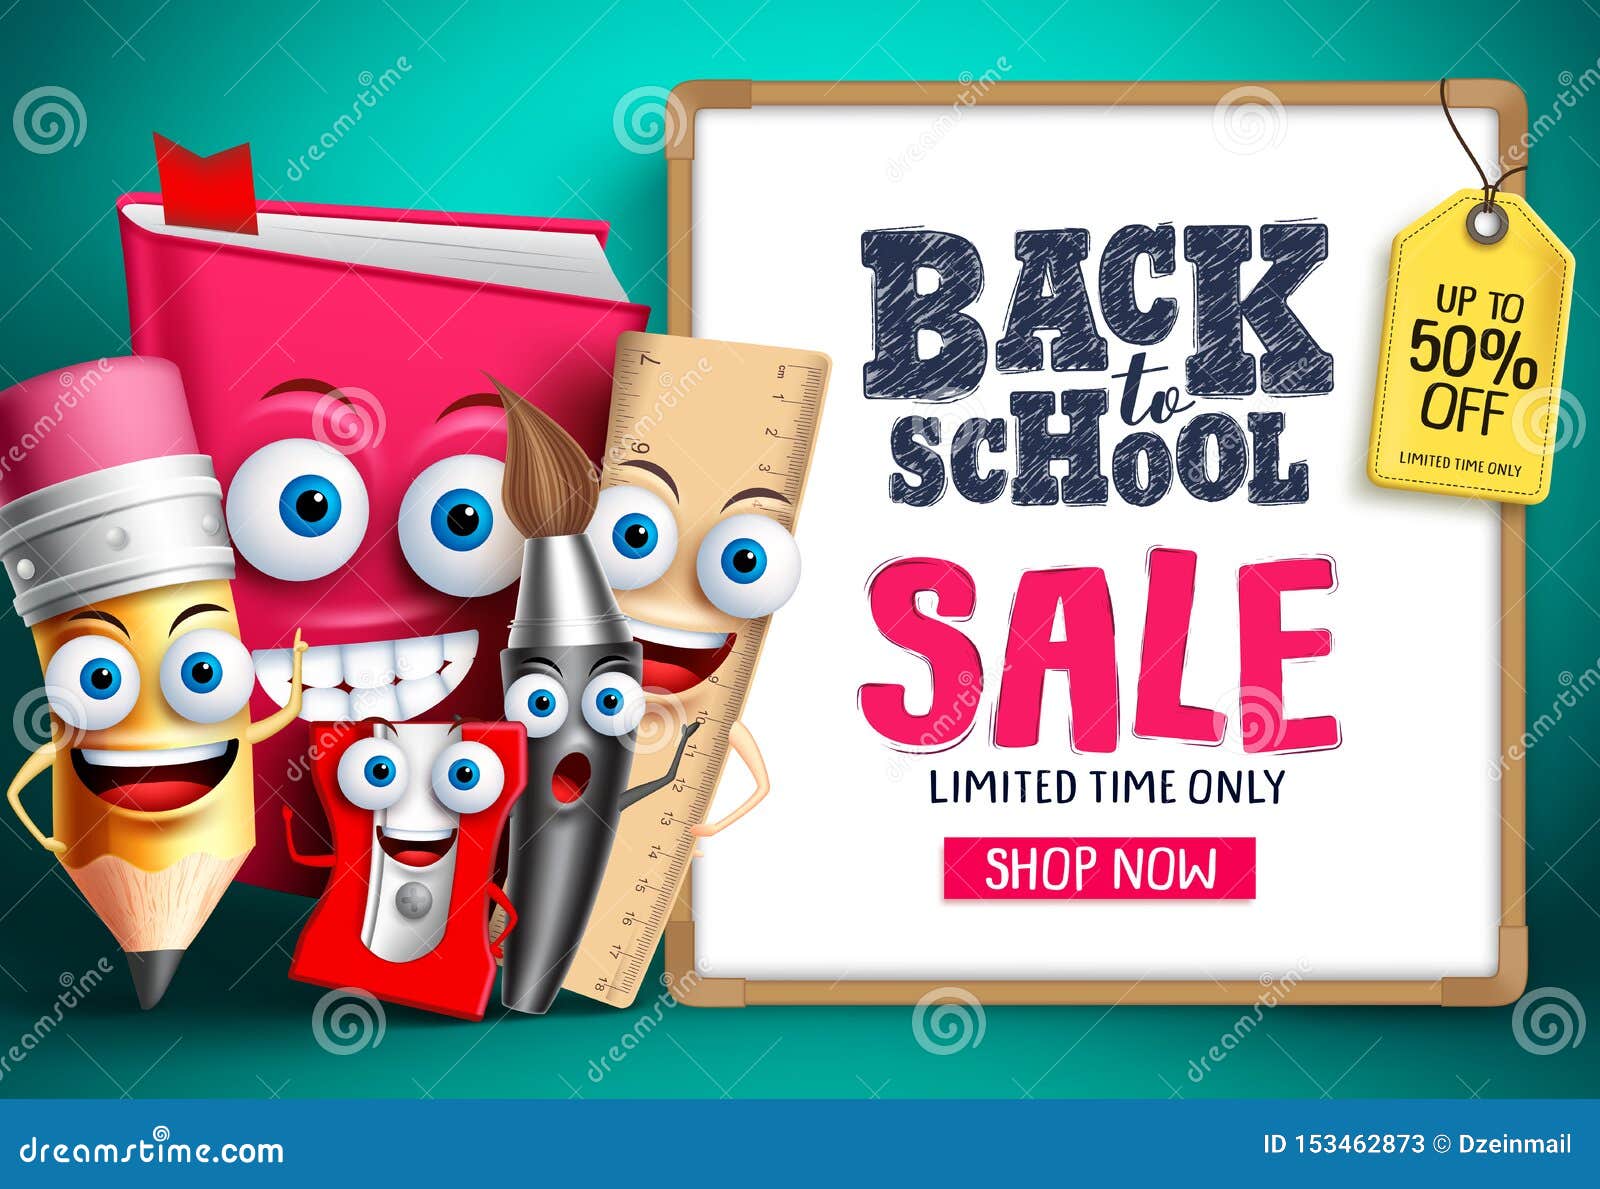 back to school sale with school  characters. education items mascots happy showing whiteboard